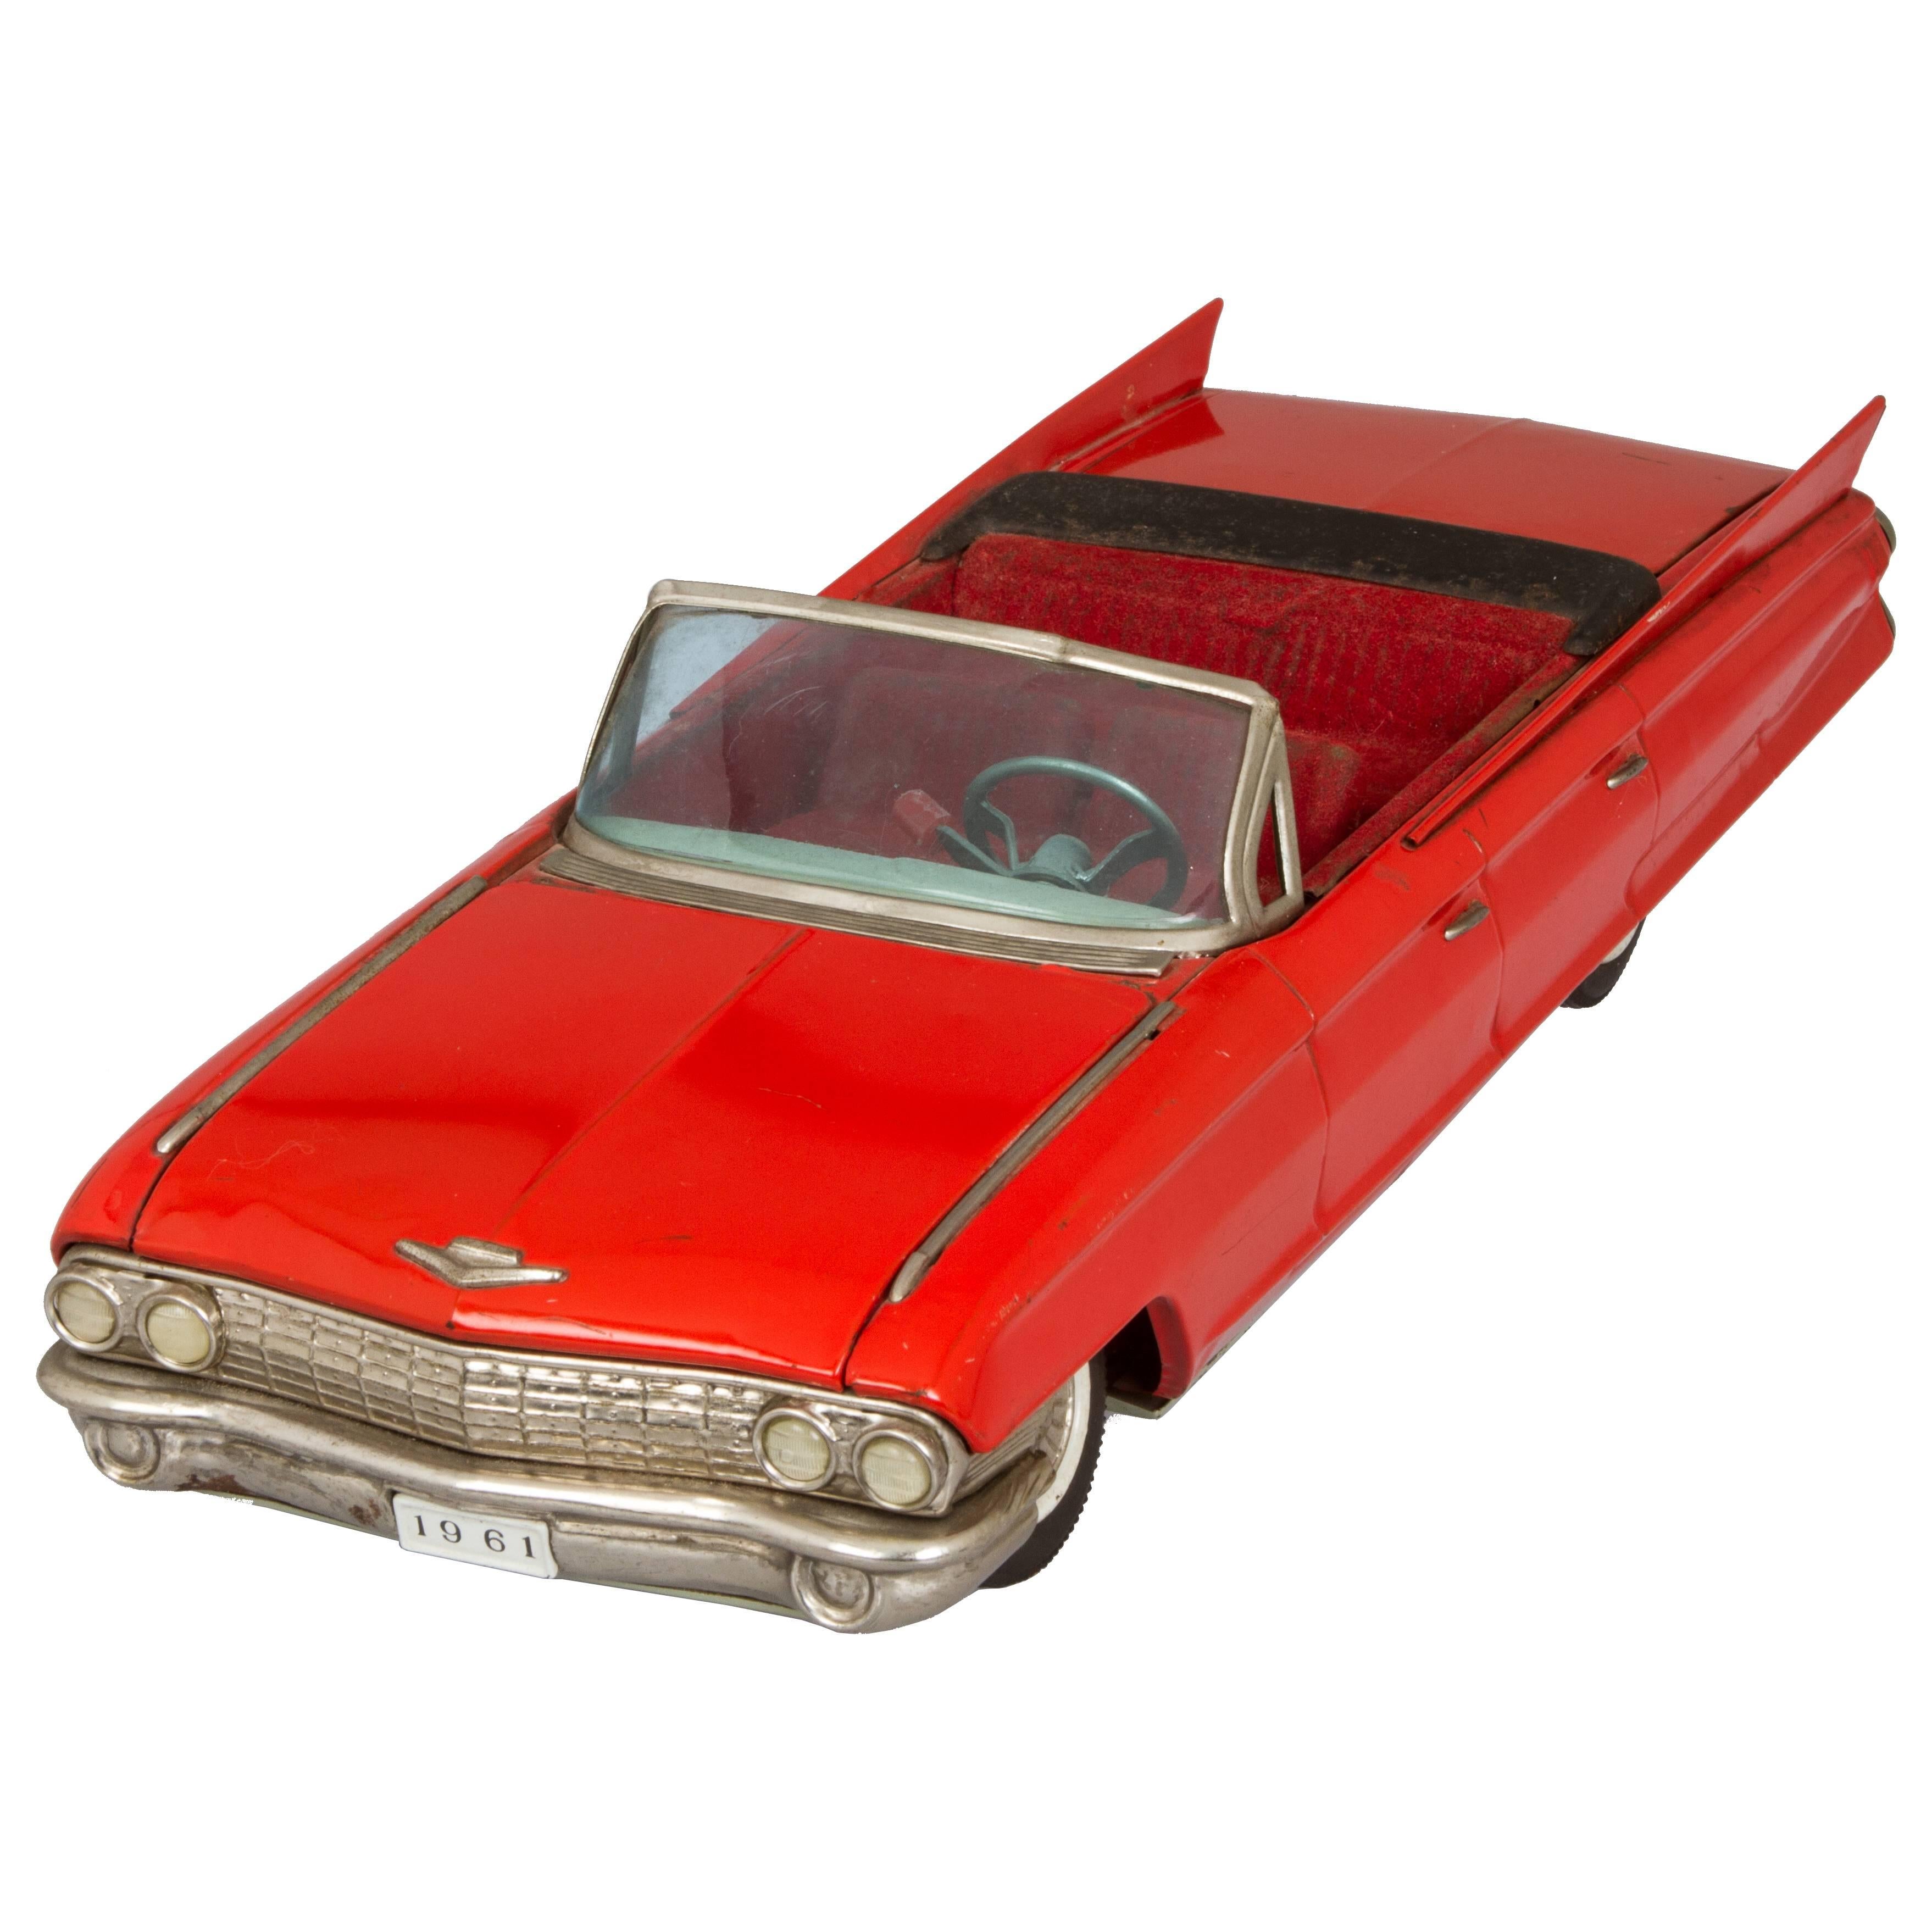 Large 1961 Vintage Cadillac Convertible Tin Toy For Sale